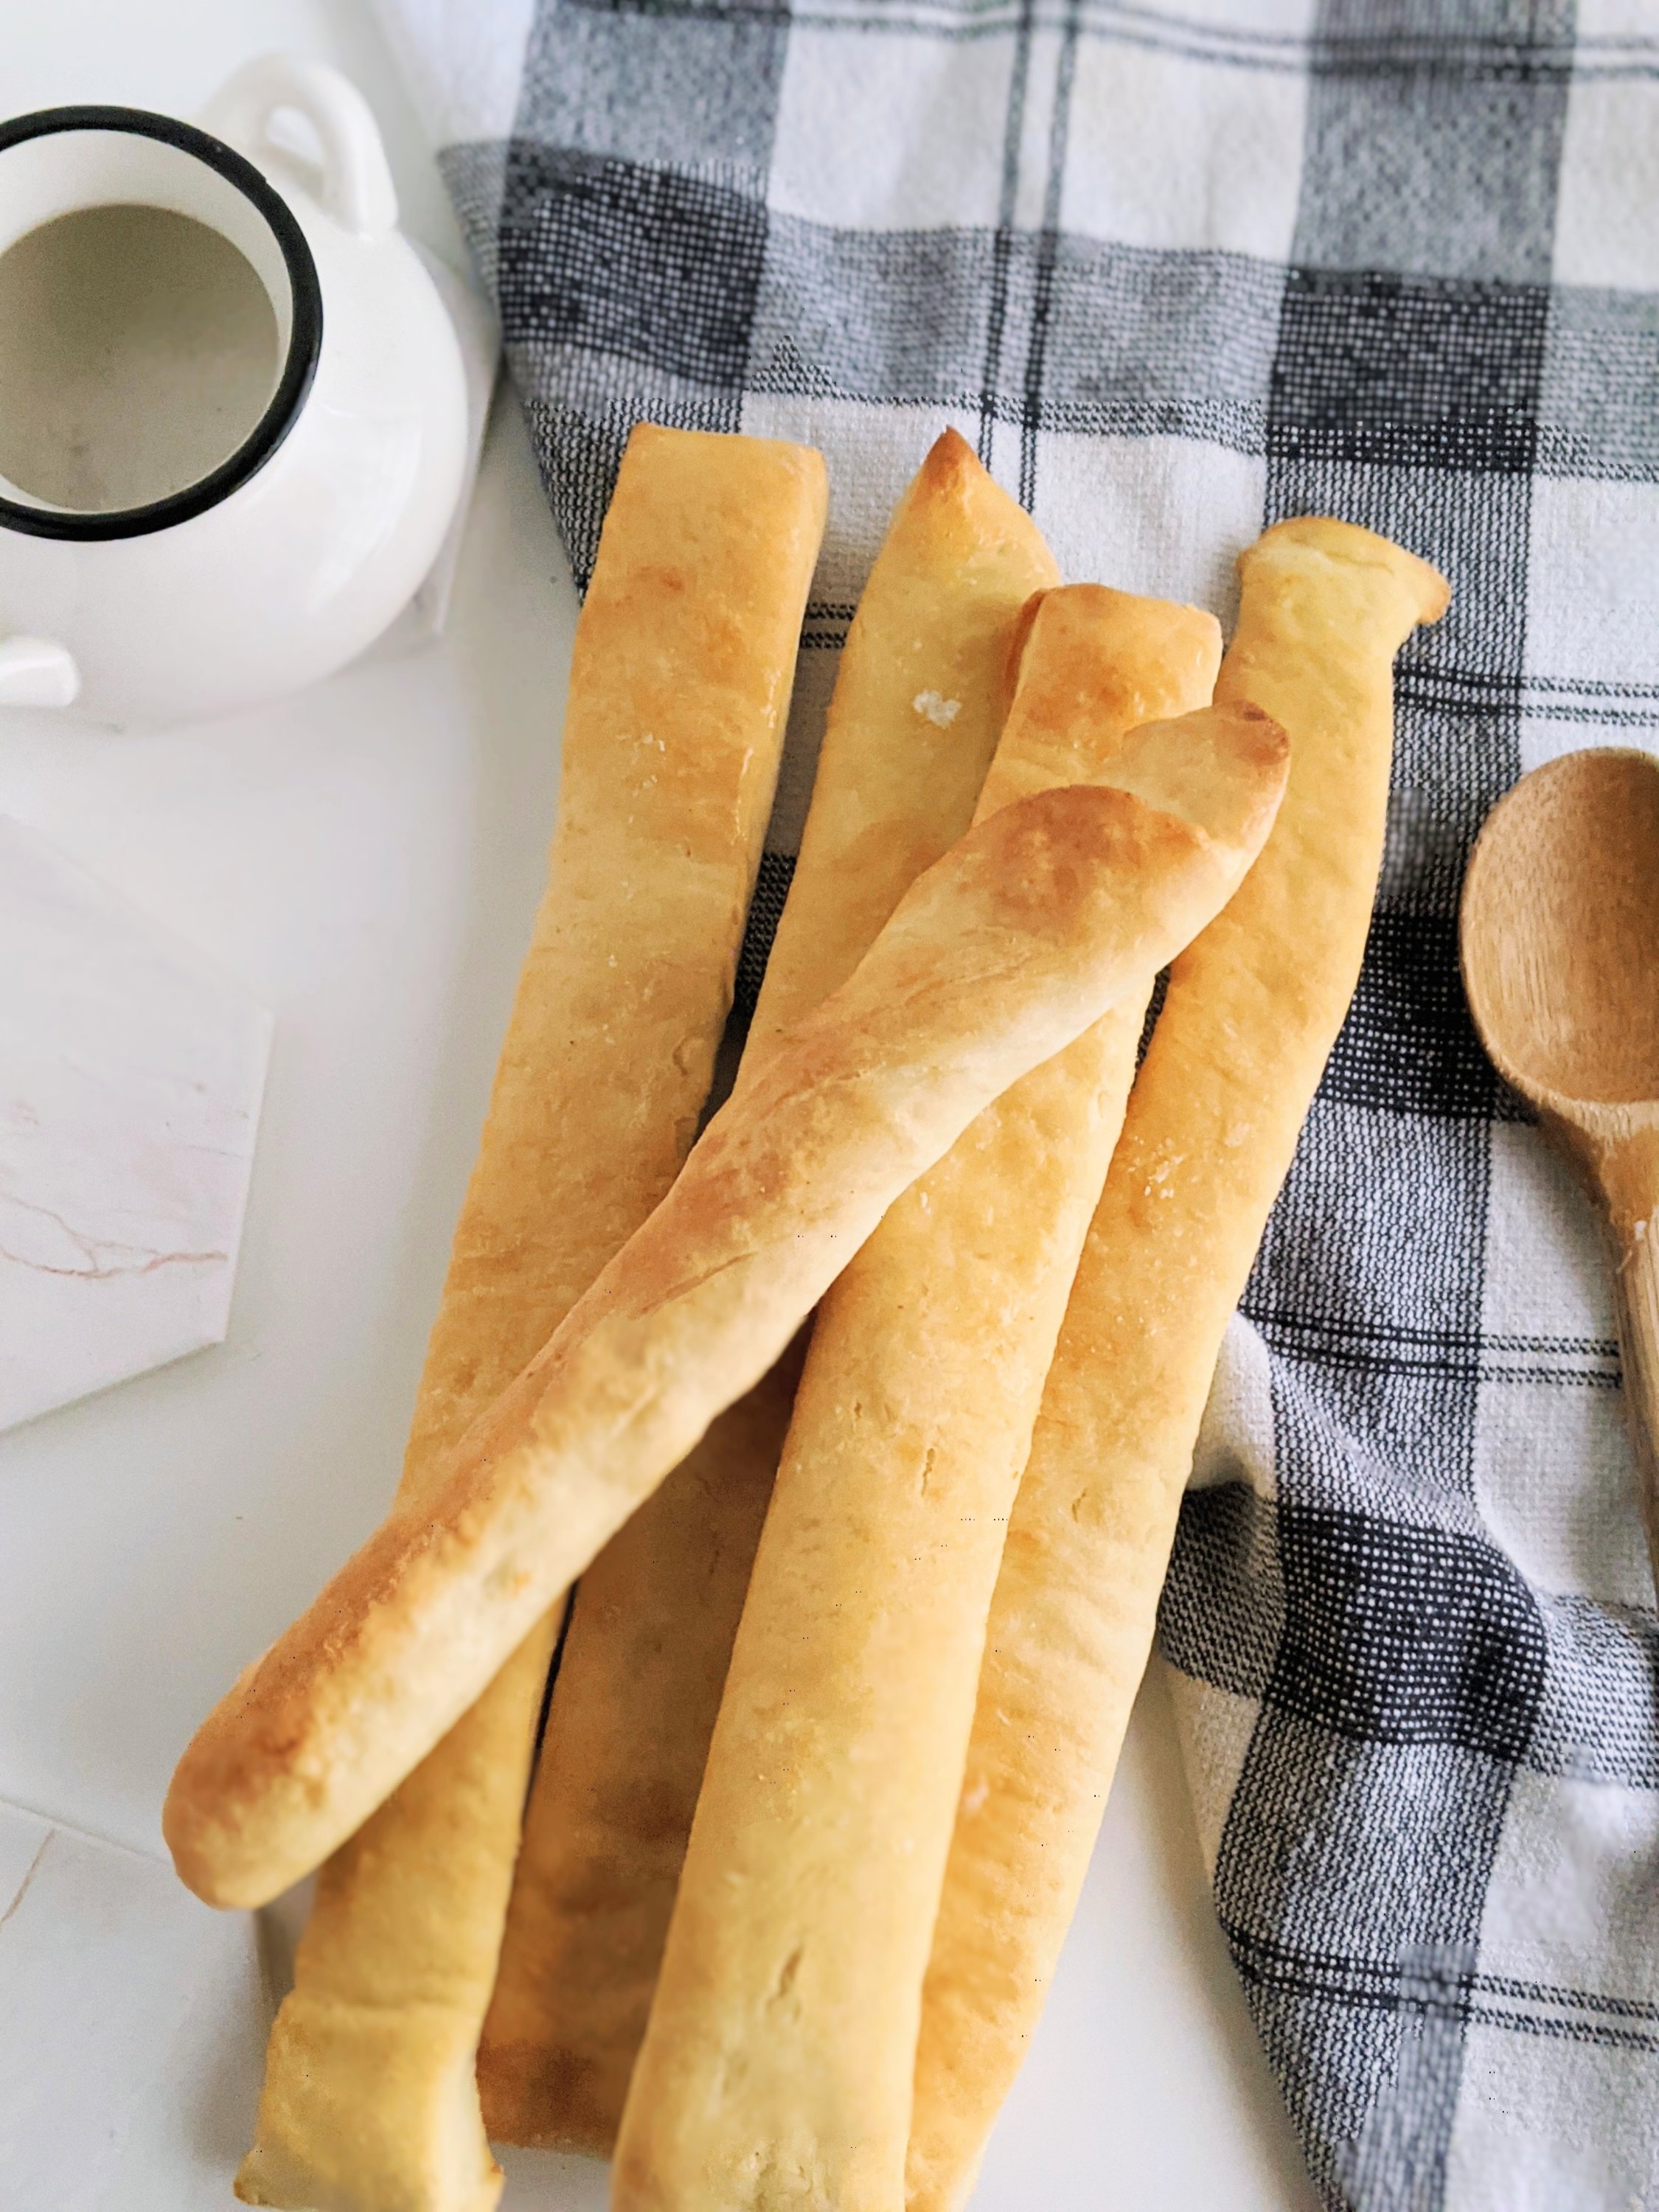 restaurant breadsticks recipe olive garden italian bread at home diy easy recipe for homemade bread sticks appetizers with soup pasta or salad side dishes